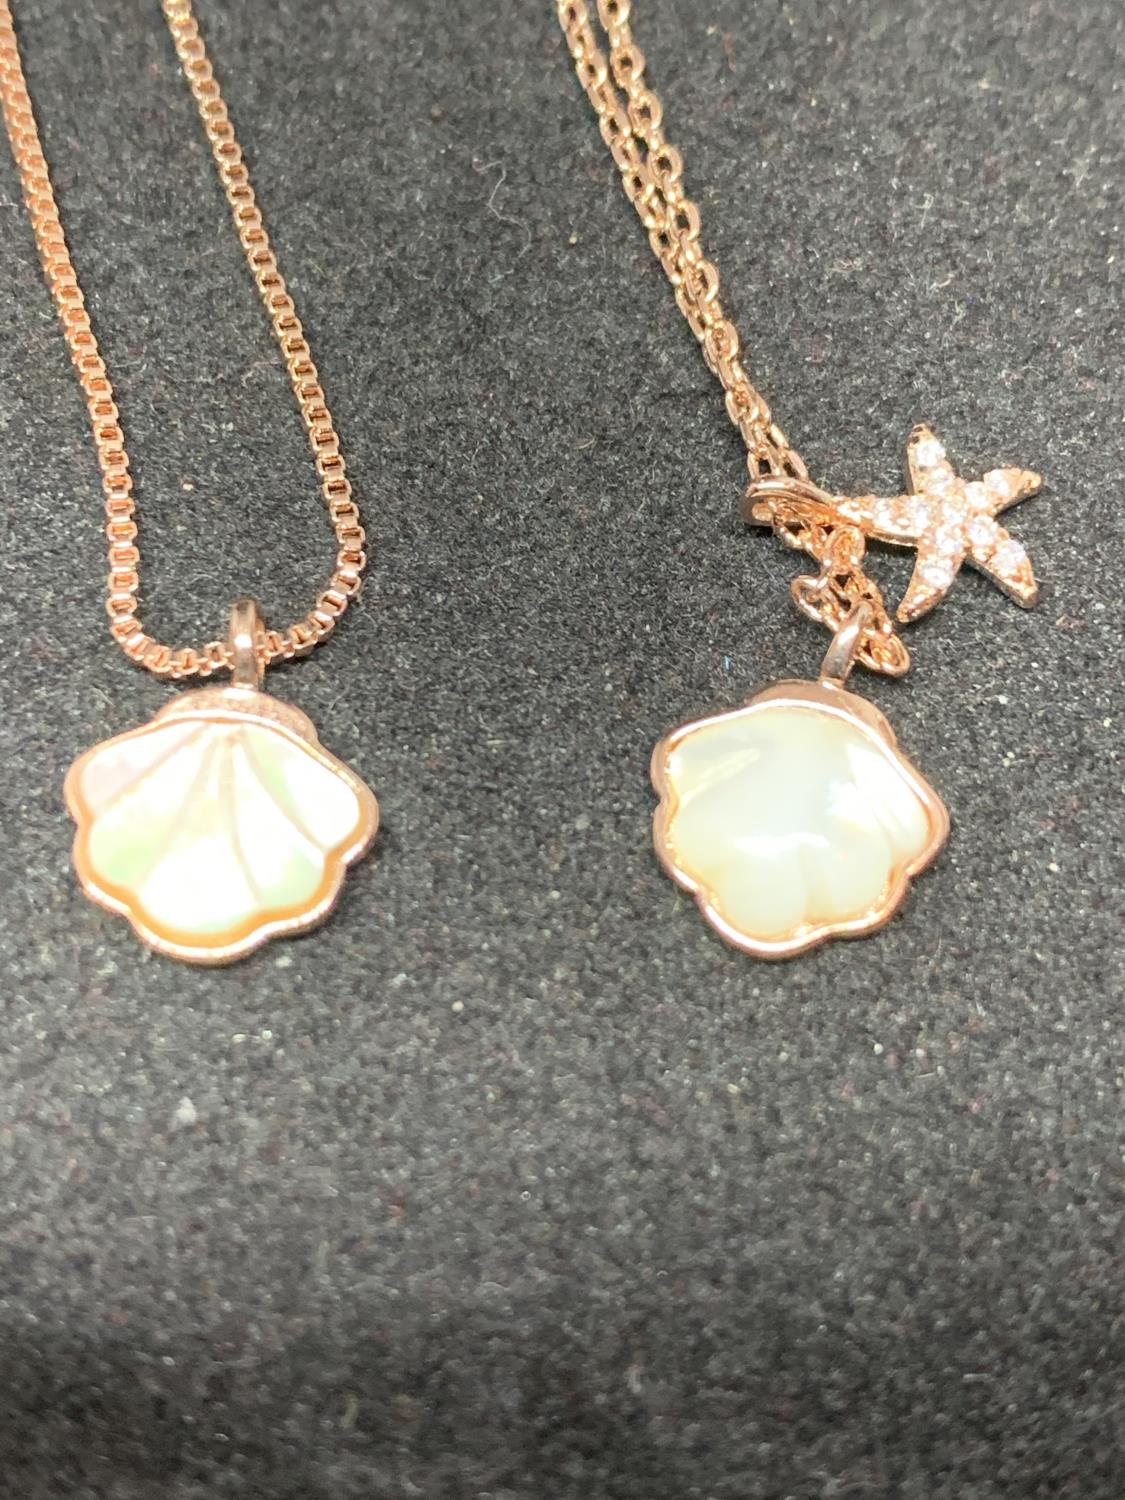 FOUR SILVER NECKLACES MARKED 925 WITH ROSE COLOURED GILDING WITH SHELL AND STAR FISH PENDANTS - Image 3 of 8